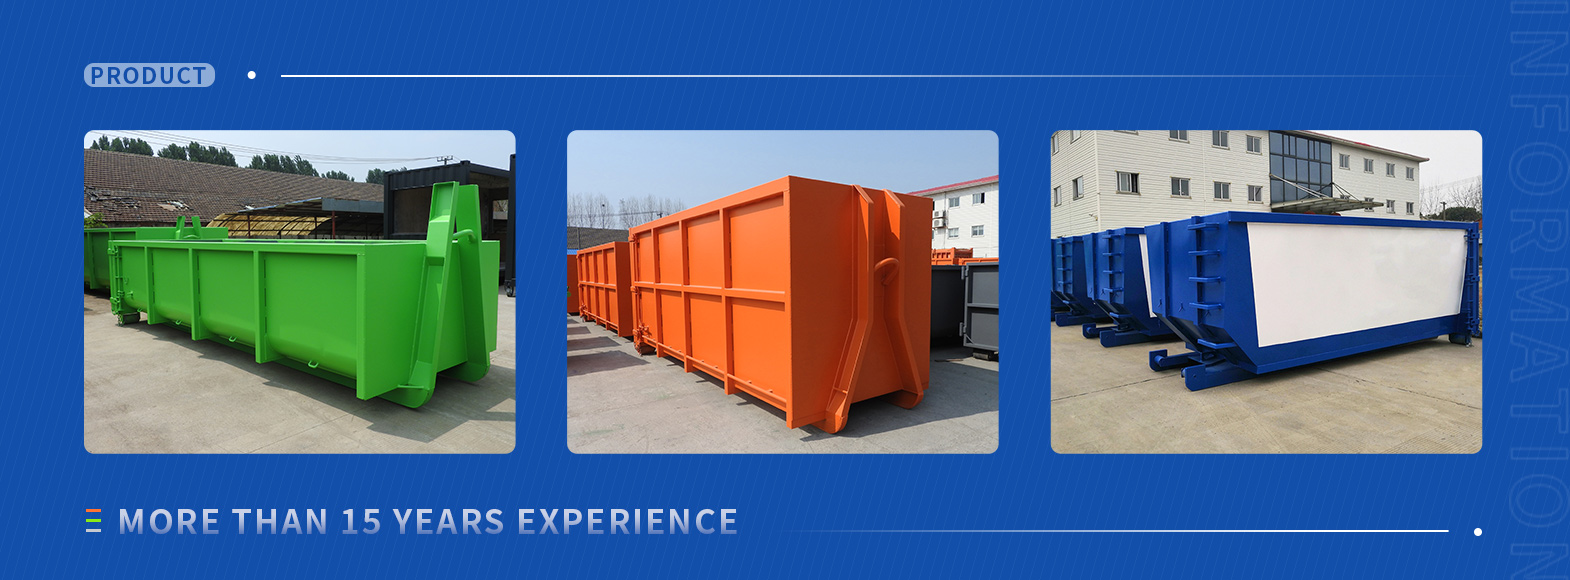 Кручок Lift Containers For Sale